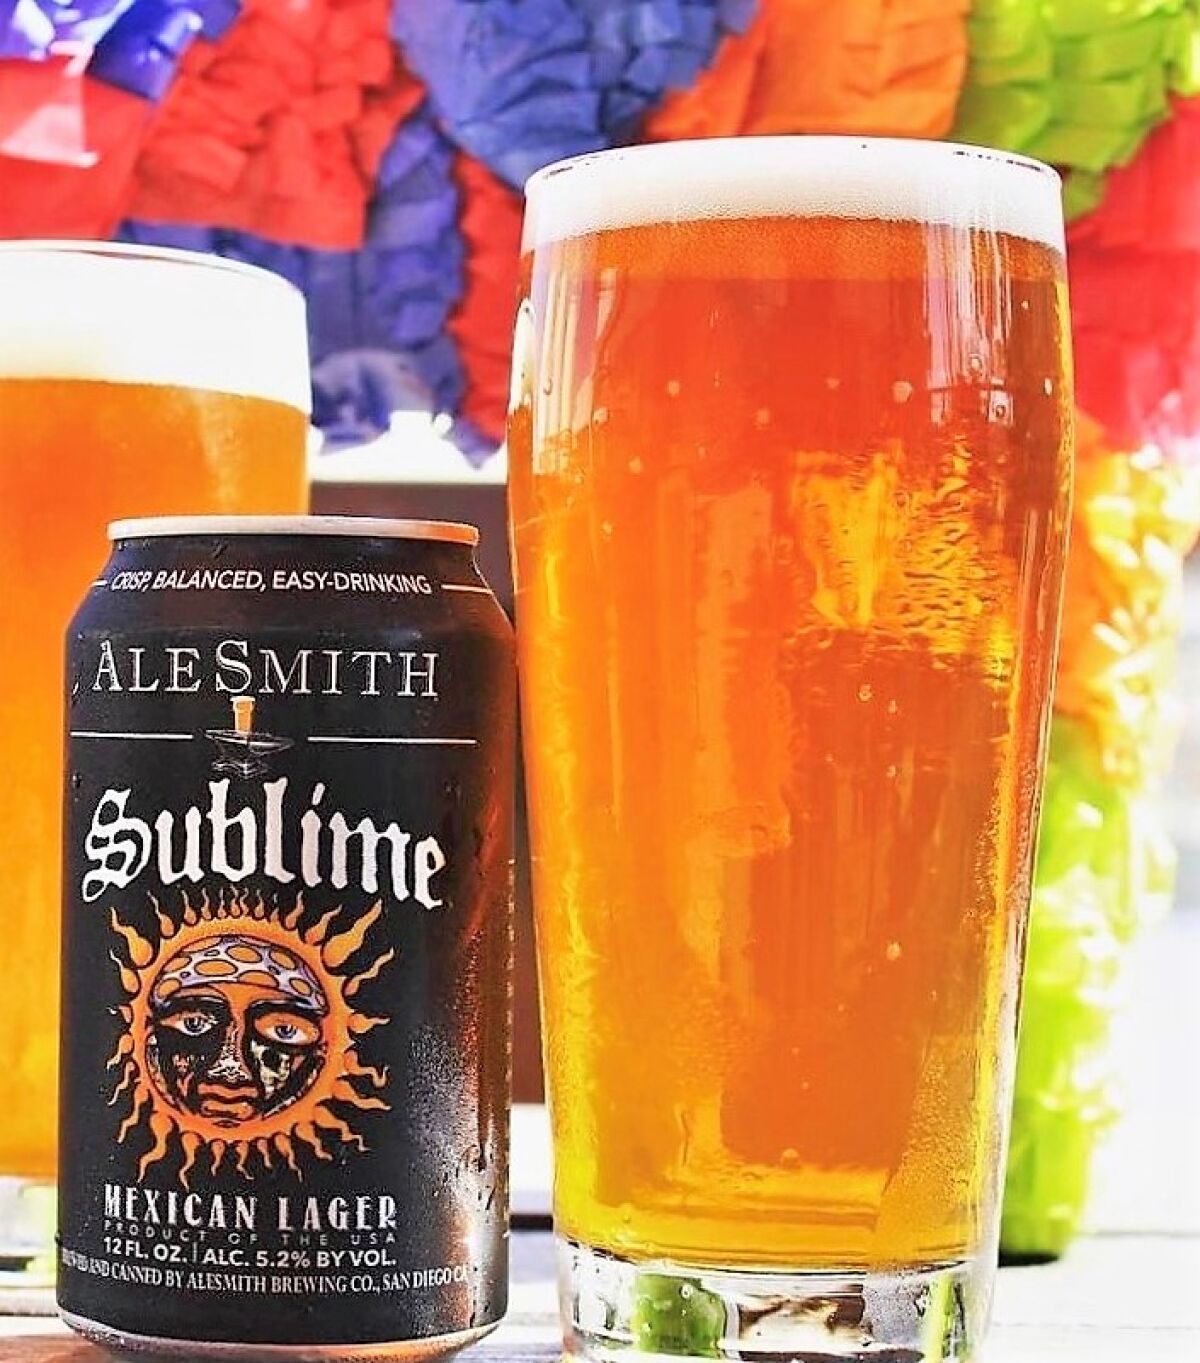 The Sublime Mexican Lager for AleSmith Brewing Company.